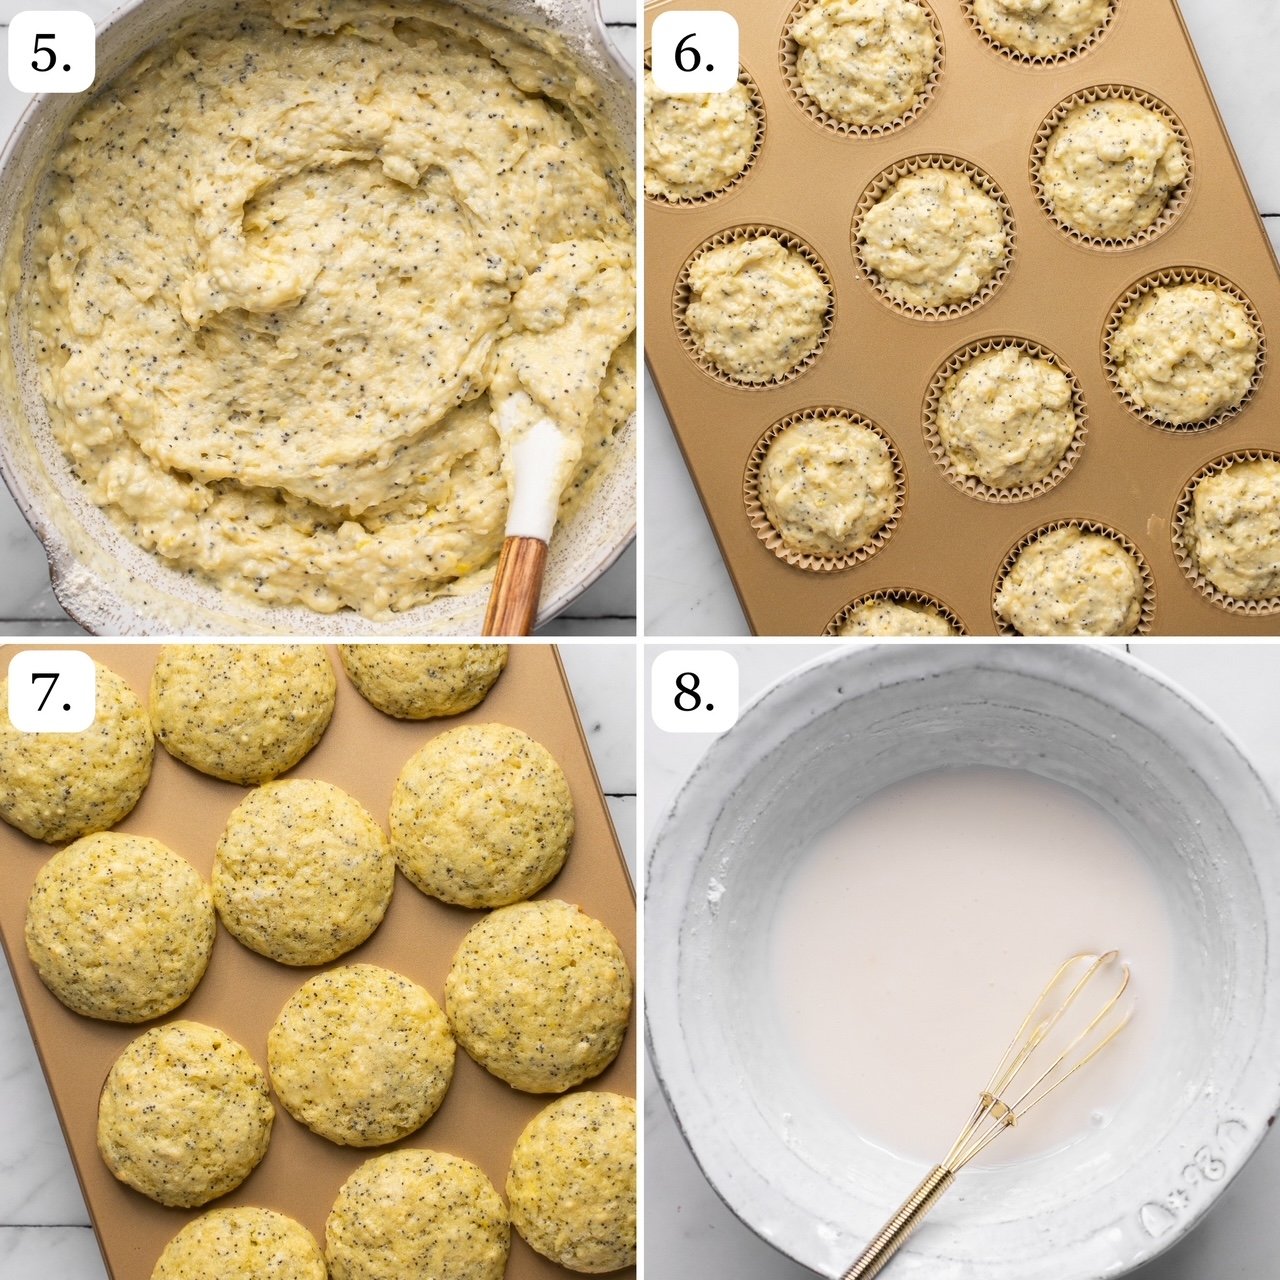 numbered step by step photos showing how to bake the muffins and make the lemon glaze